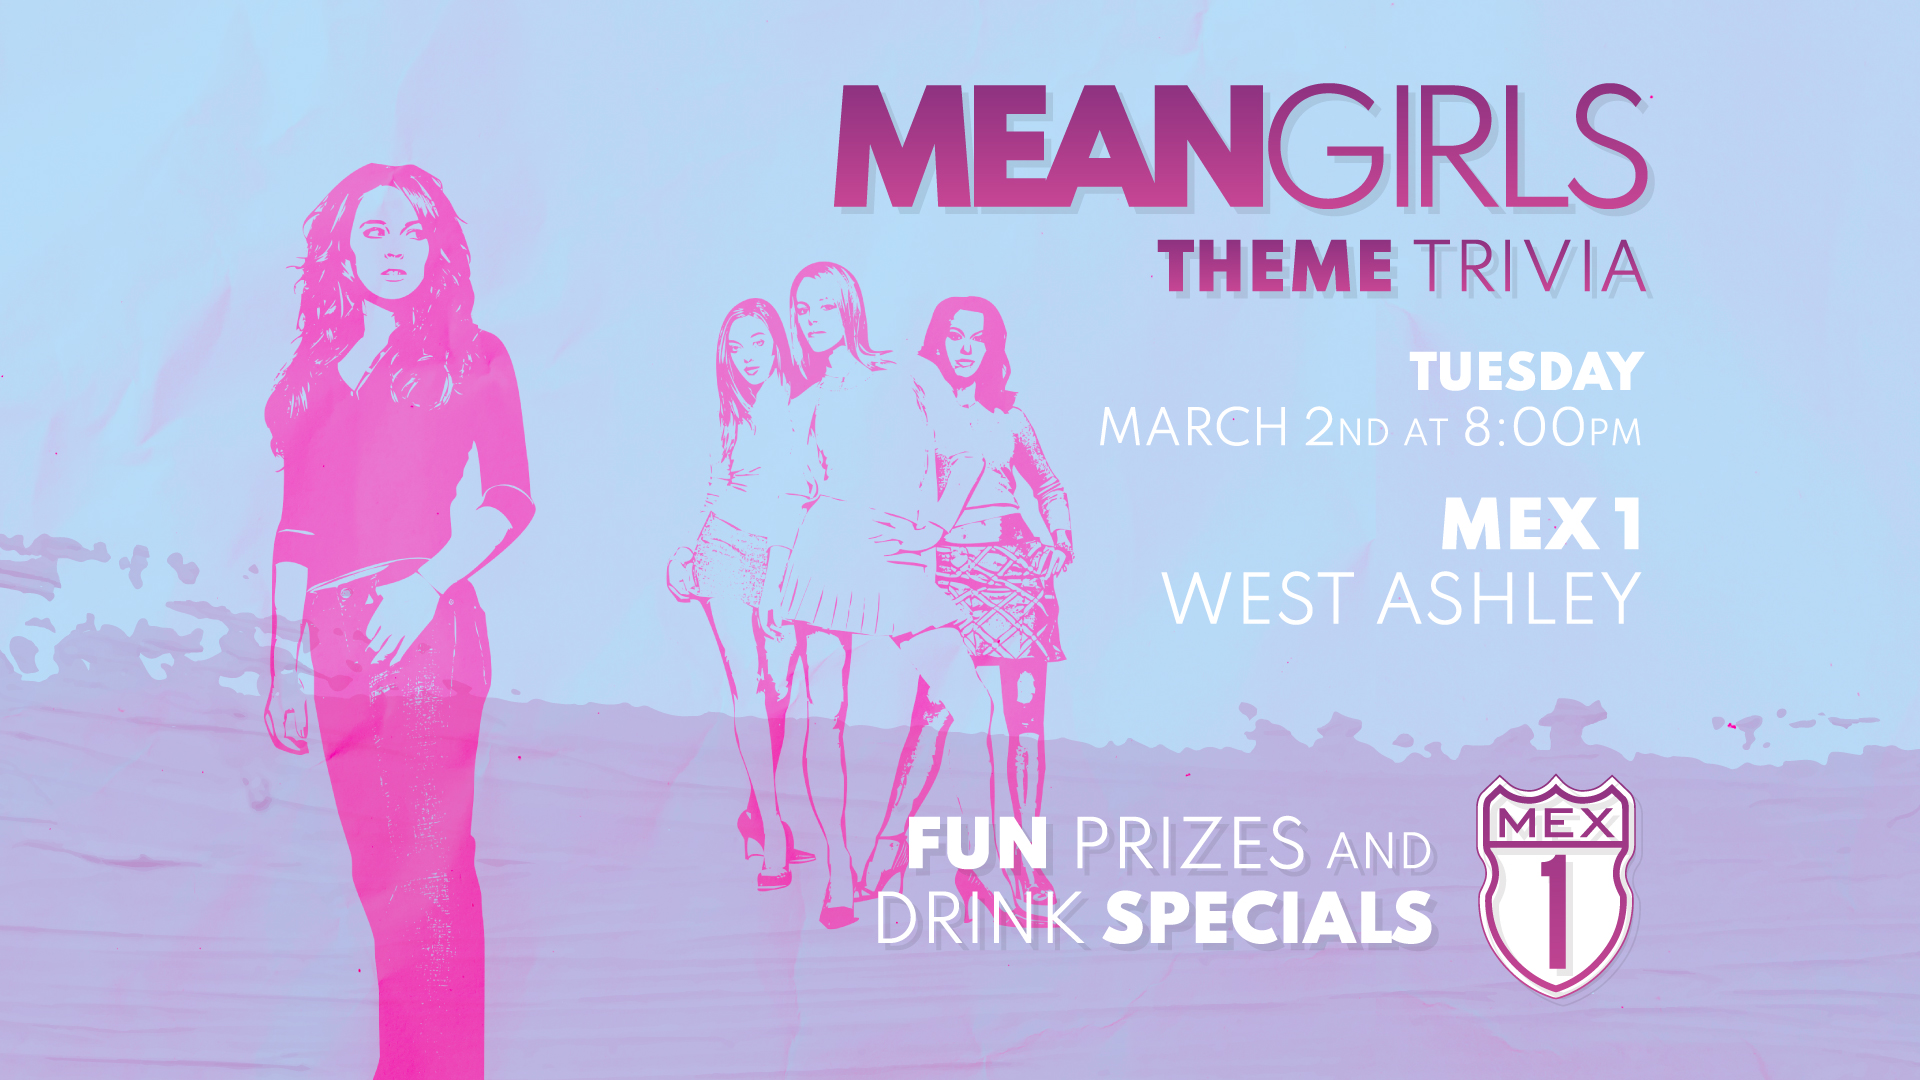 Mean Girls Theme Trivia at Mex 1 West Ashley on Tuesday, March 2nd at 8pm